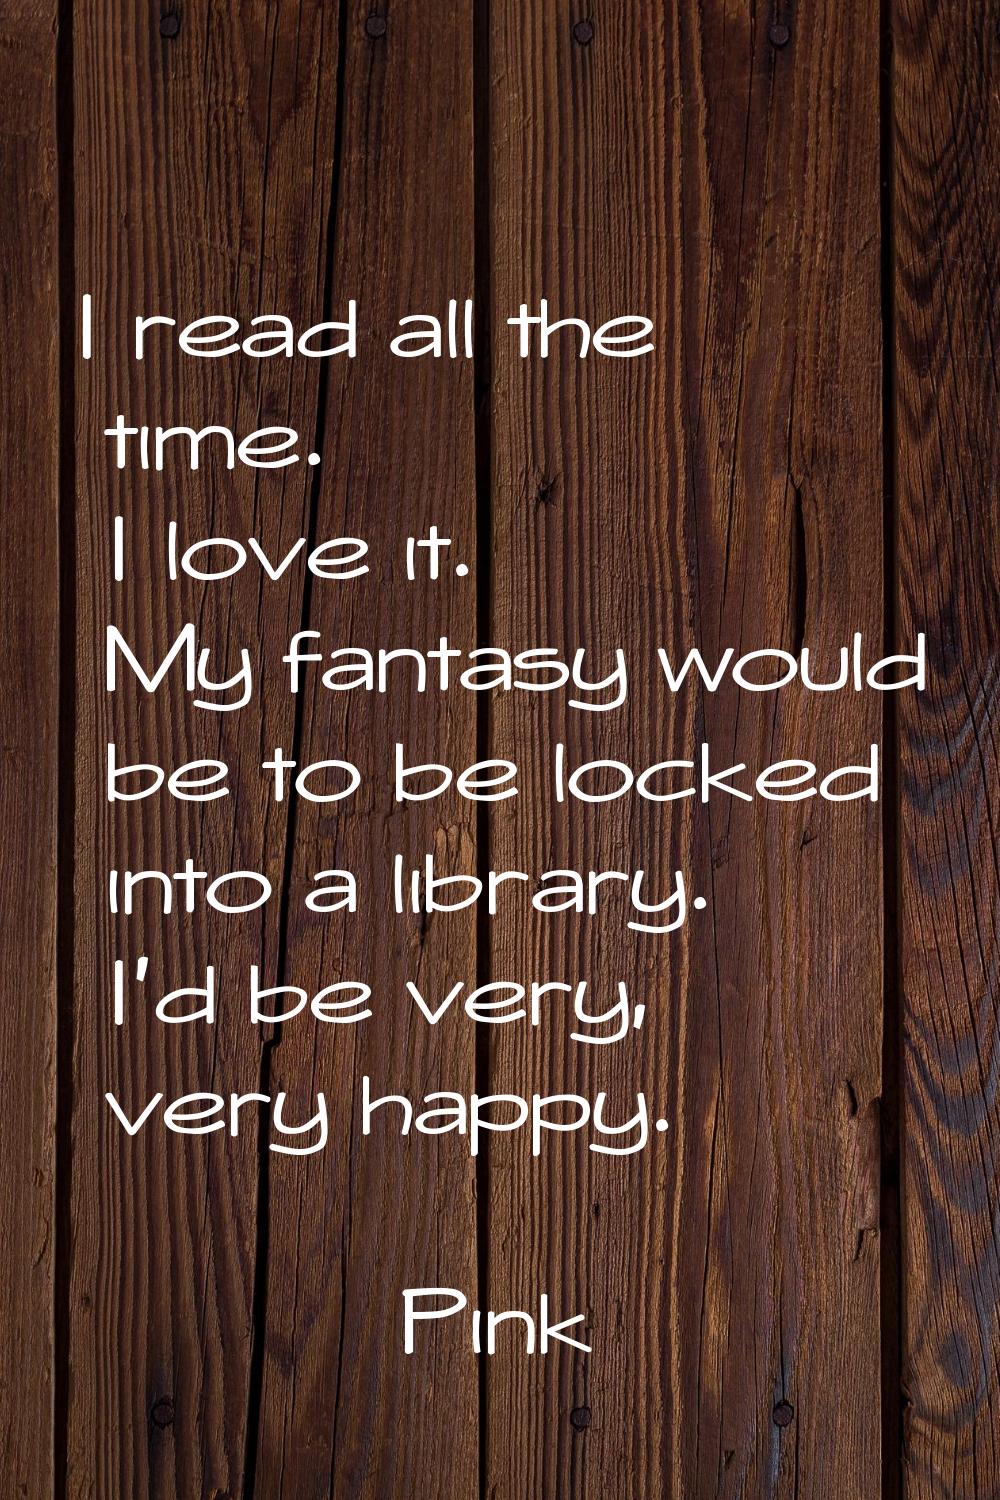 I read all the time. I love it. My fantasy would be to be locked into a library. I'd be very, very 